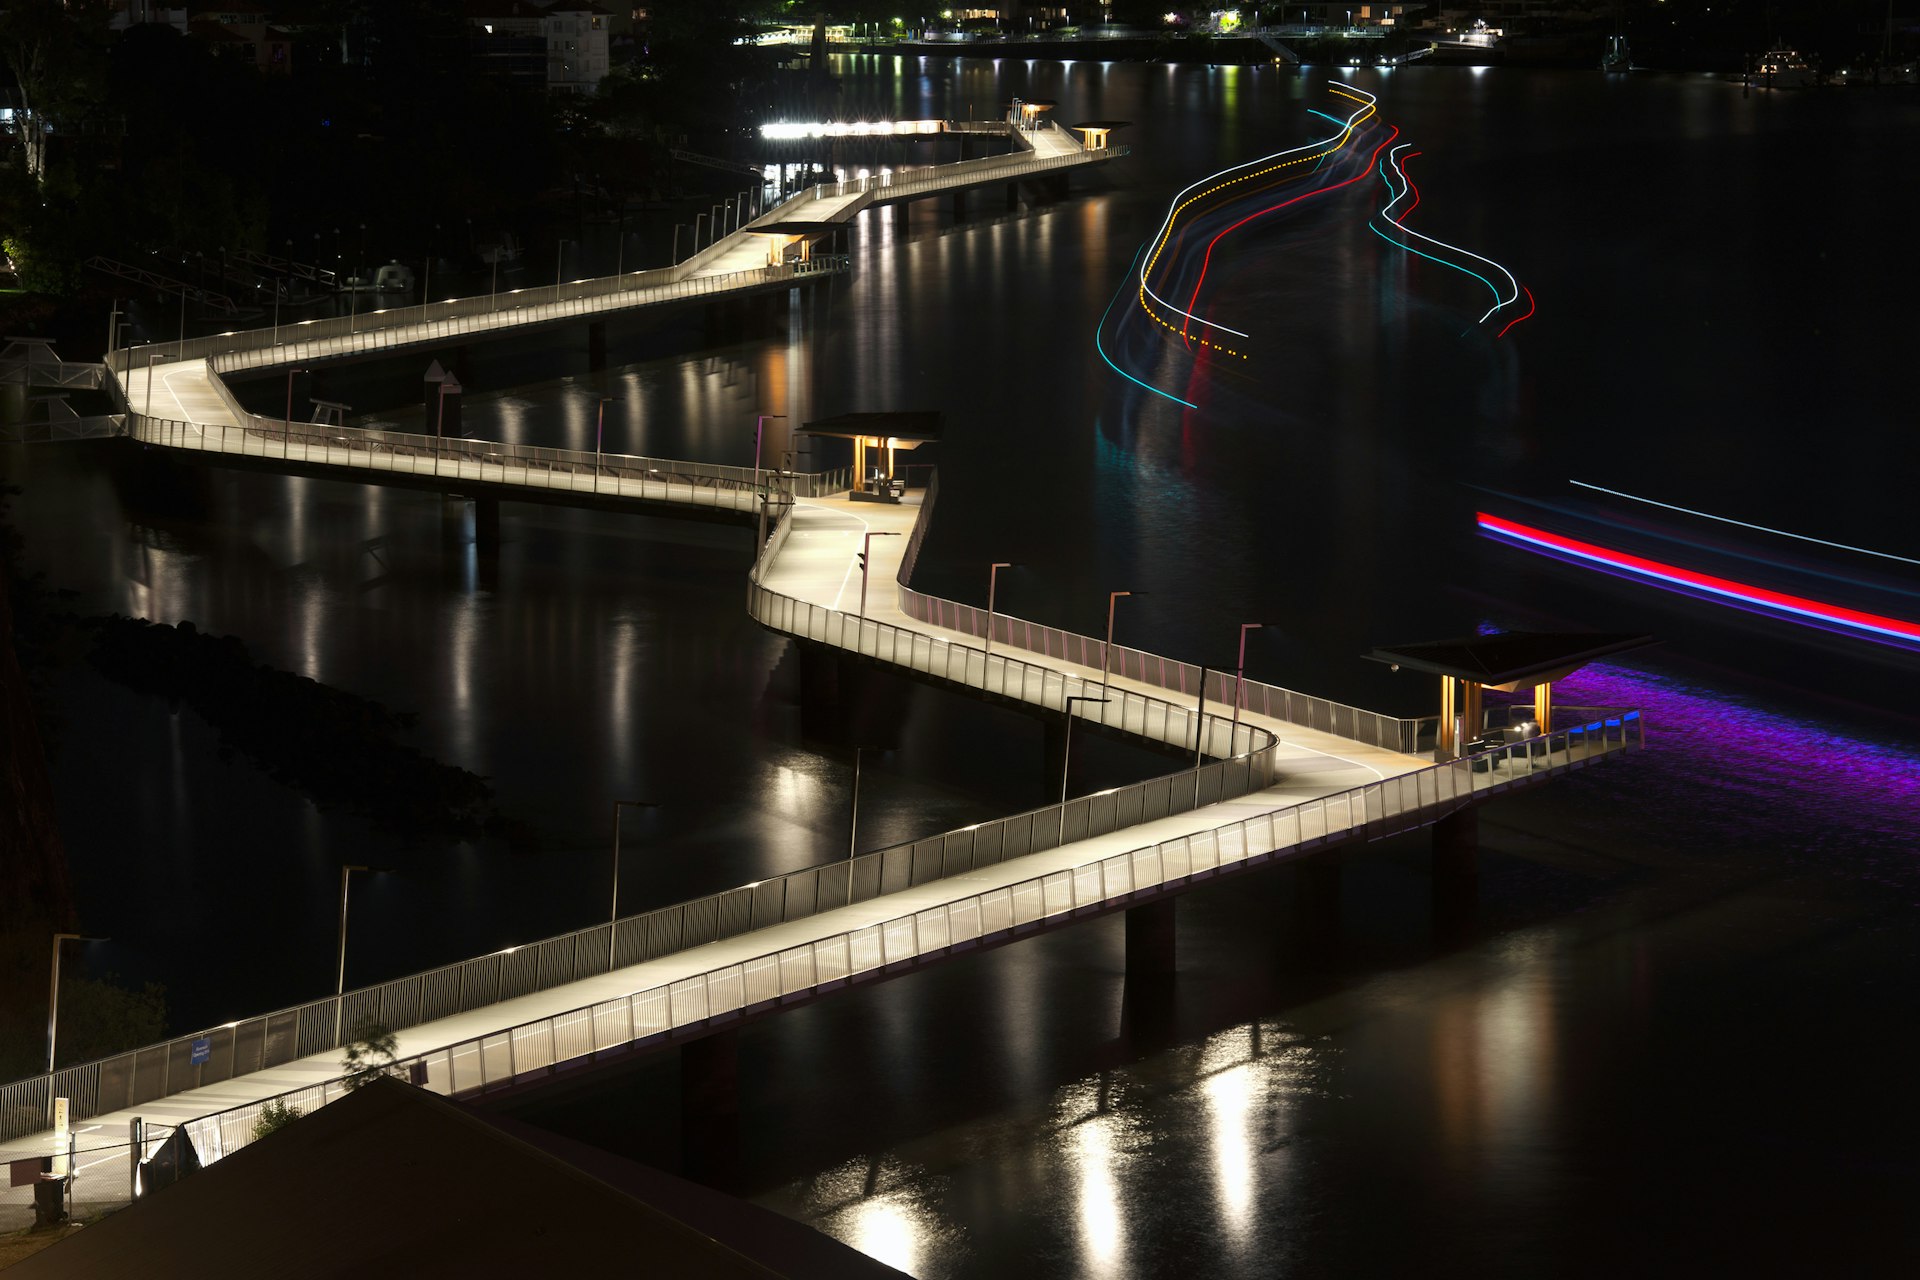 The Newfarm Riverwalk in Brisbane, Queensland, Australia. A scenic place to walk along or ride your bike with views of the Story Bridge and Brisbane City.